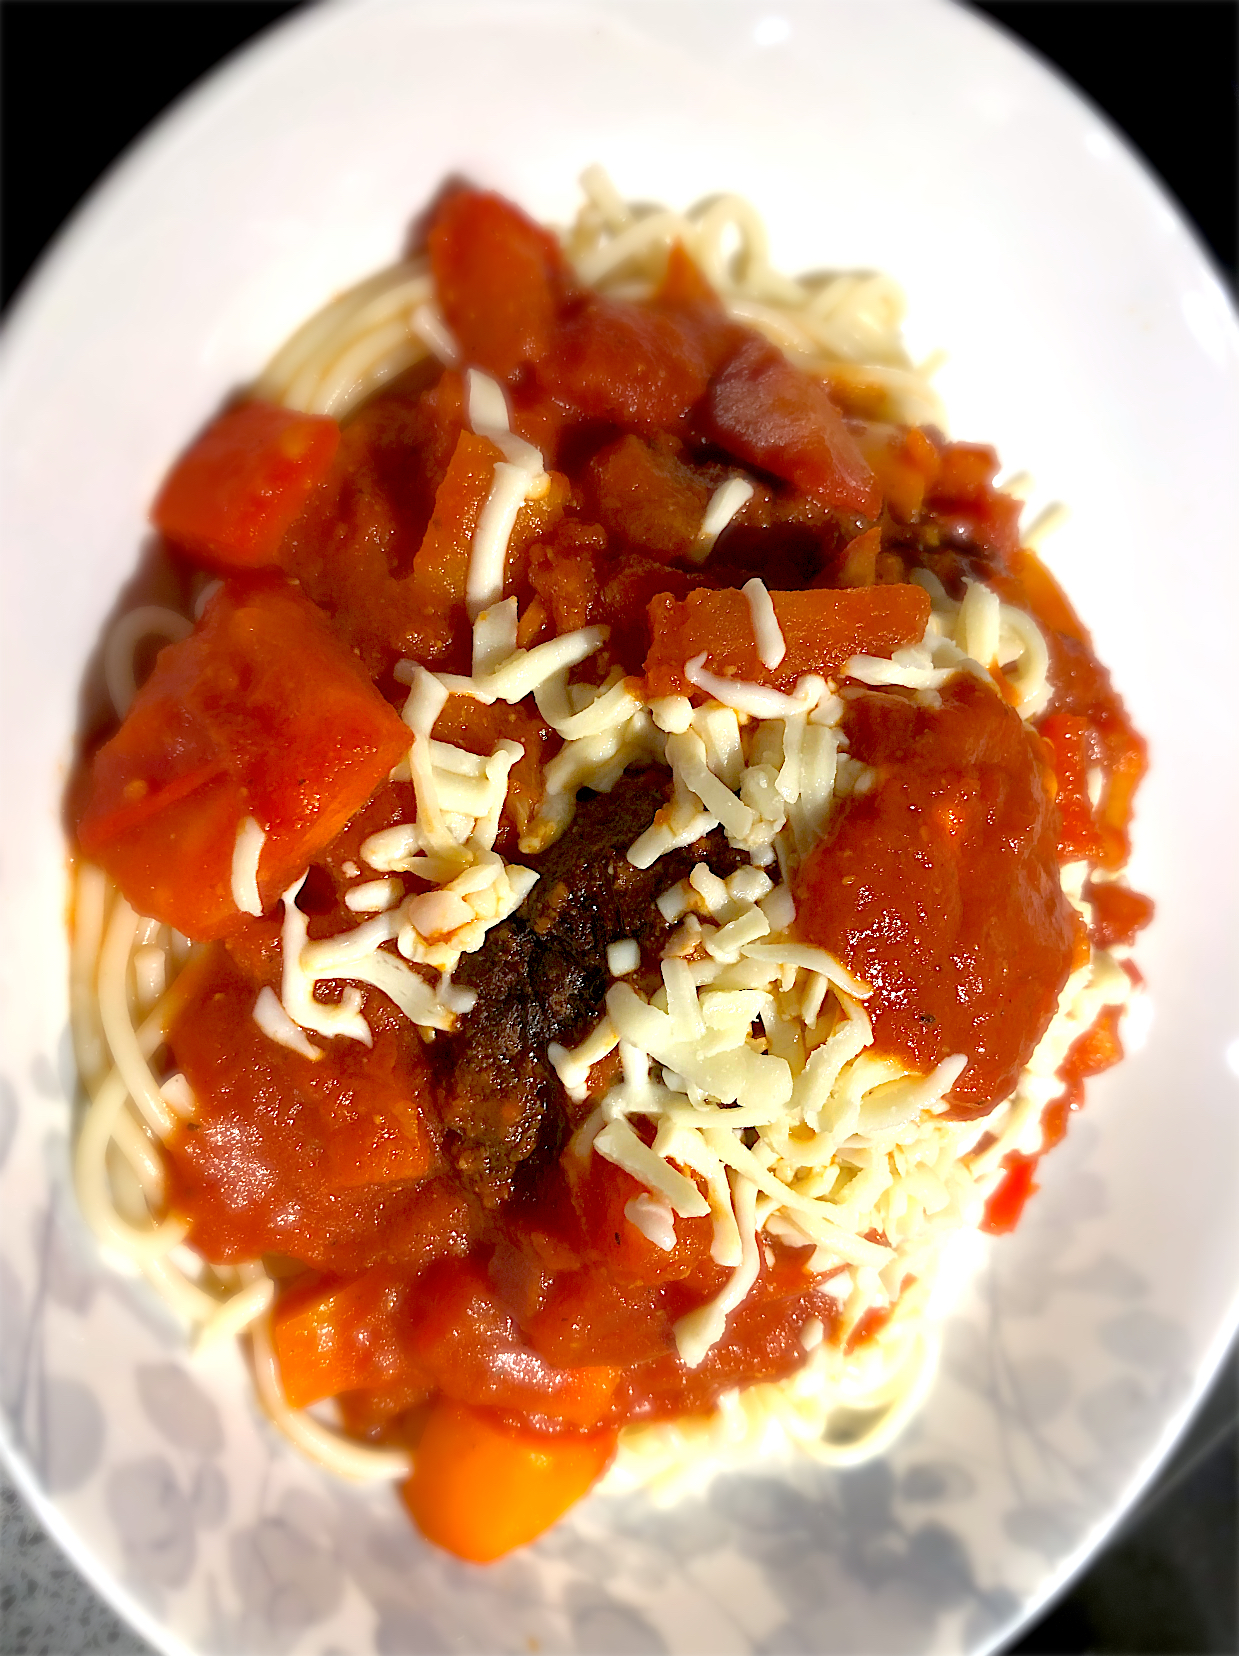 BentoFox's dish Thick and rich homemade Spaghetti sauce, pressed ground beef patty topped with mozzarella cheese 😋